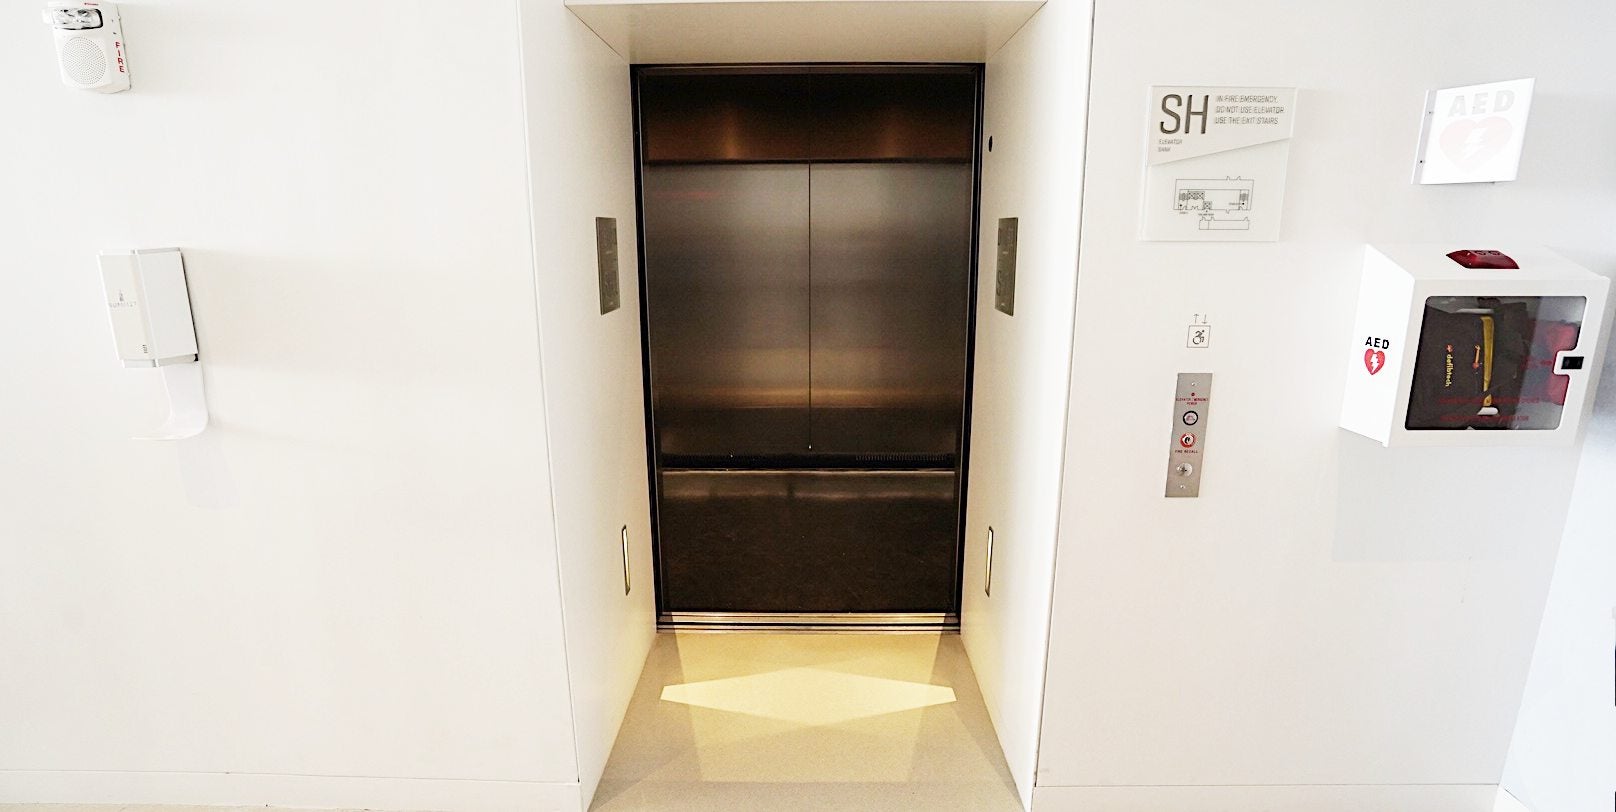 SERVICE ELEVATOR FOR ALL GUESTS WITH WHEELCHAIRS AND STROLLERS (91st-93rd FLOORS)